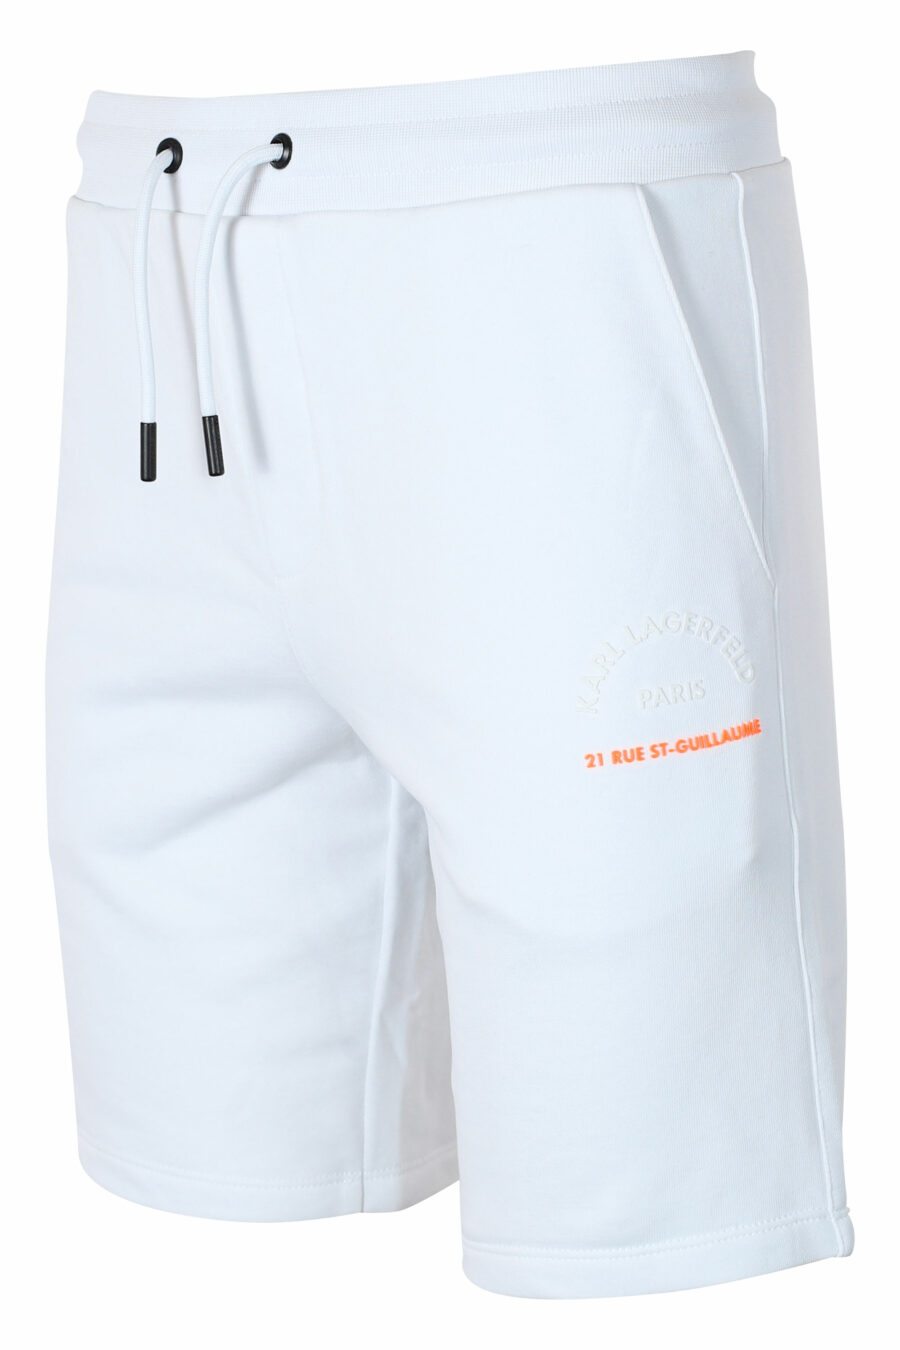 Tracksuit bottoms white short with orange "rue st guillaume" minilogue - IMG 9560